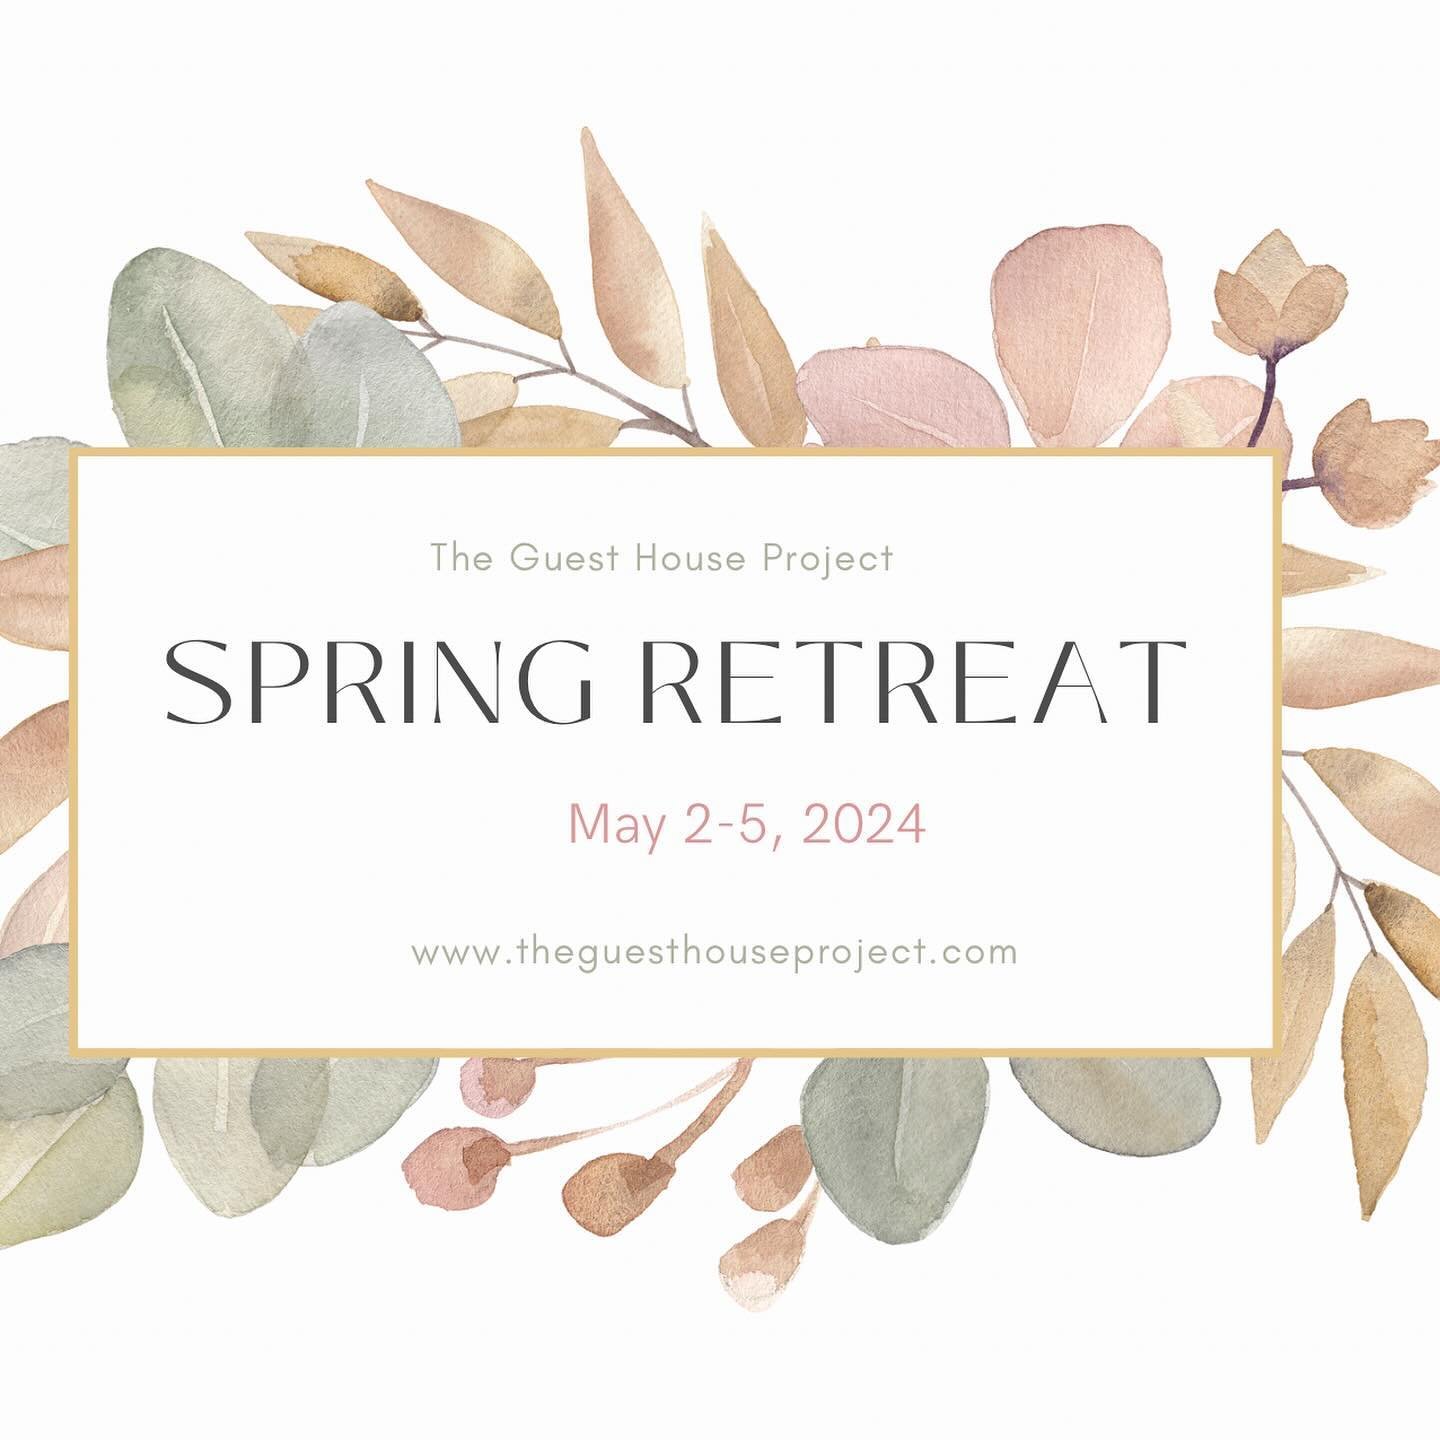 We are busily prepping for our Spring Respite Retreat coming up this weekend! Gift bags, worship packets, lots of delicious food and books we love are all being packed up for the trip down to beautiful Savannah, GA. Please pray with us as we prepare 